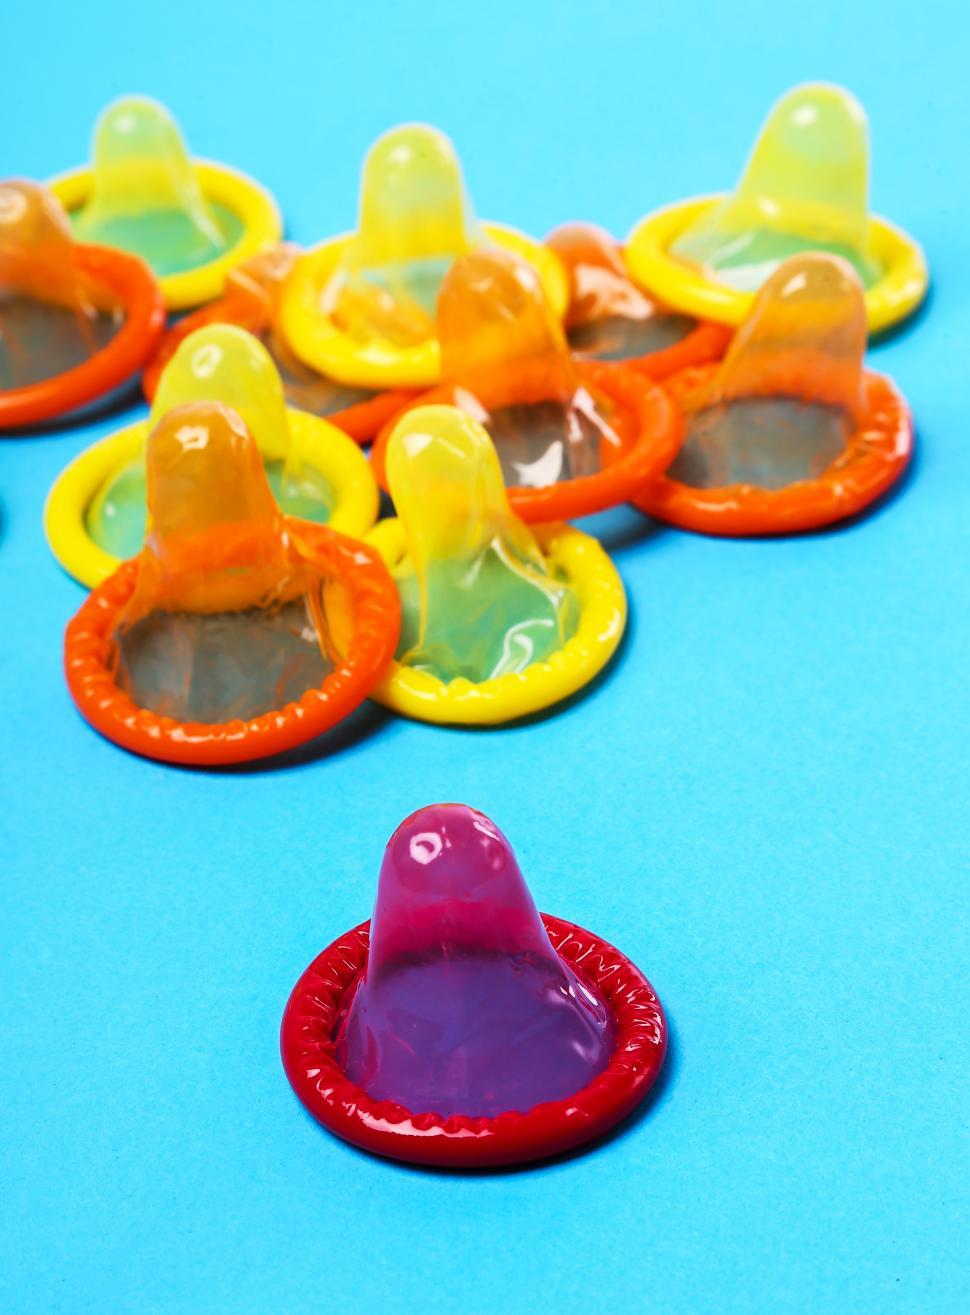 Free Image of Colorful condoms 